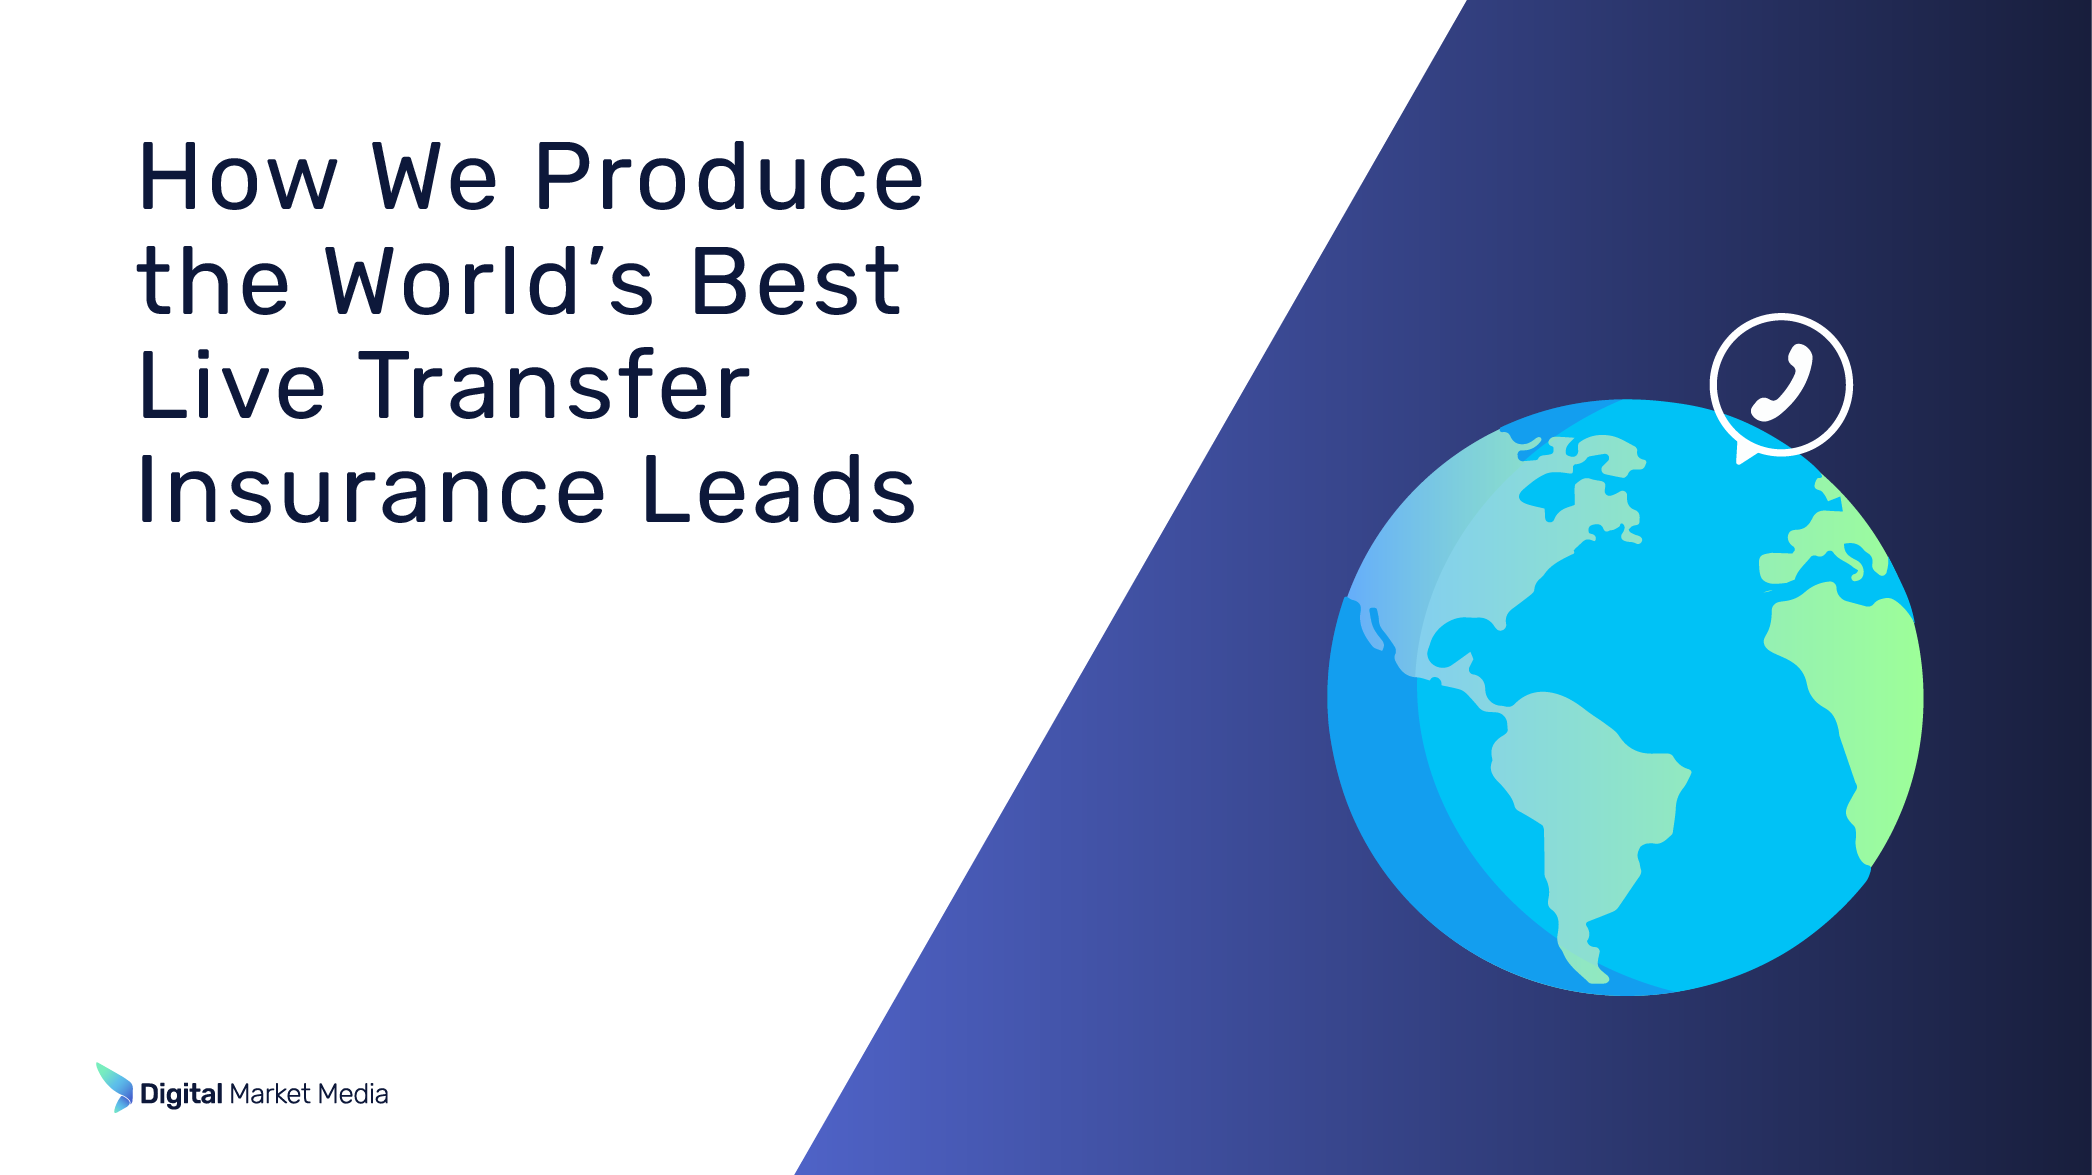 How We Produce the World’s Best Live Transfer Insurance Leads